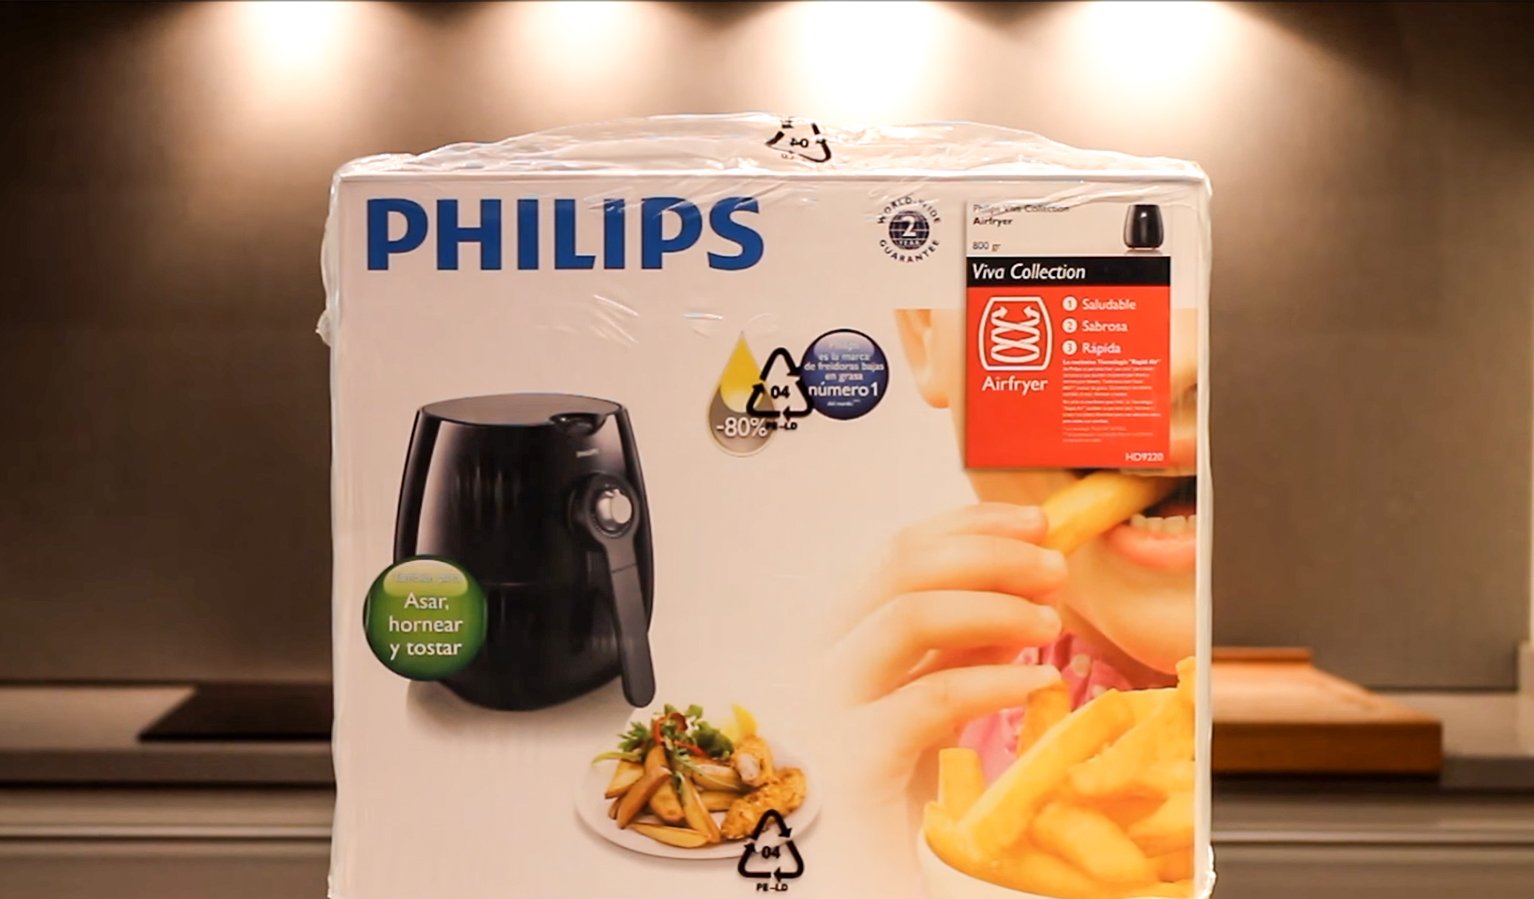 Unboxing the Philips Airfryer 9220